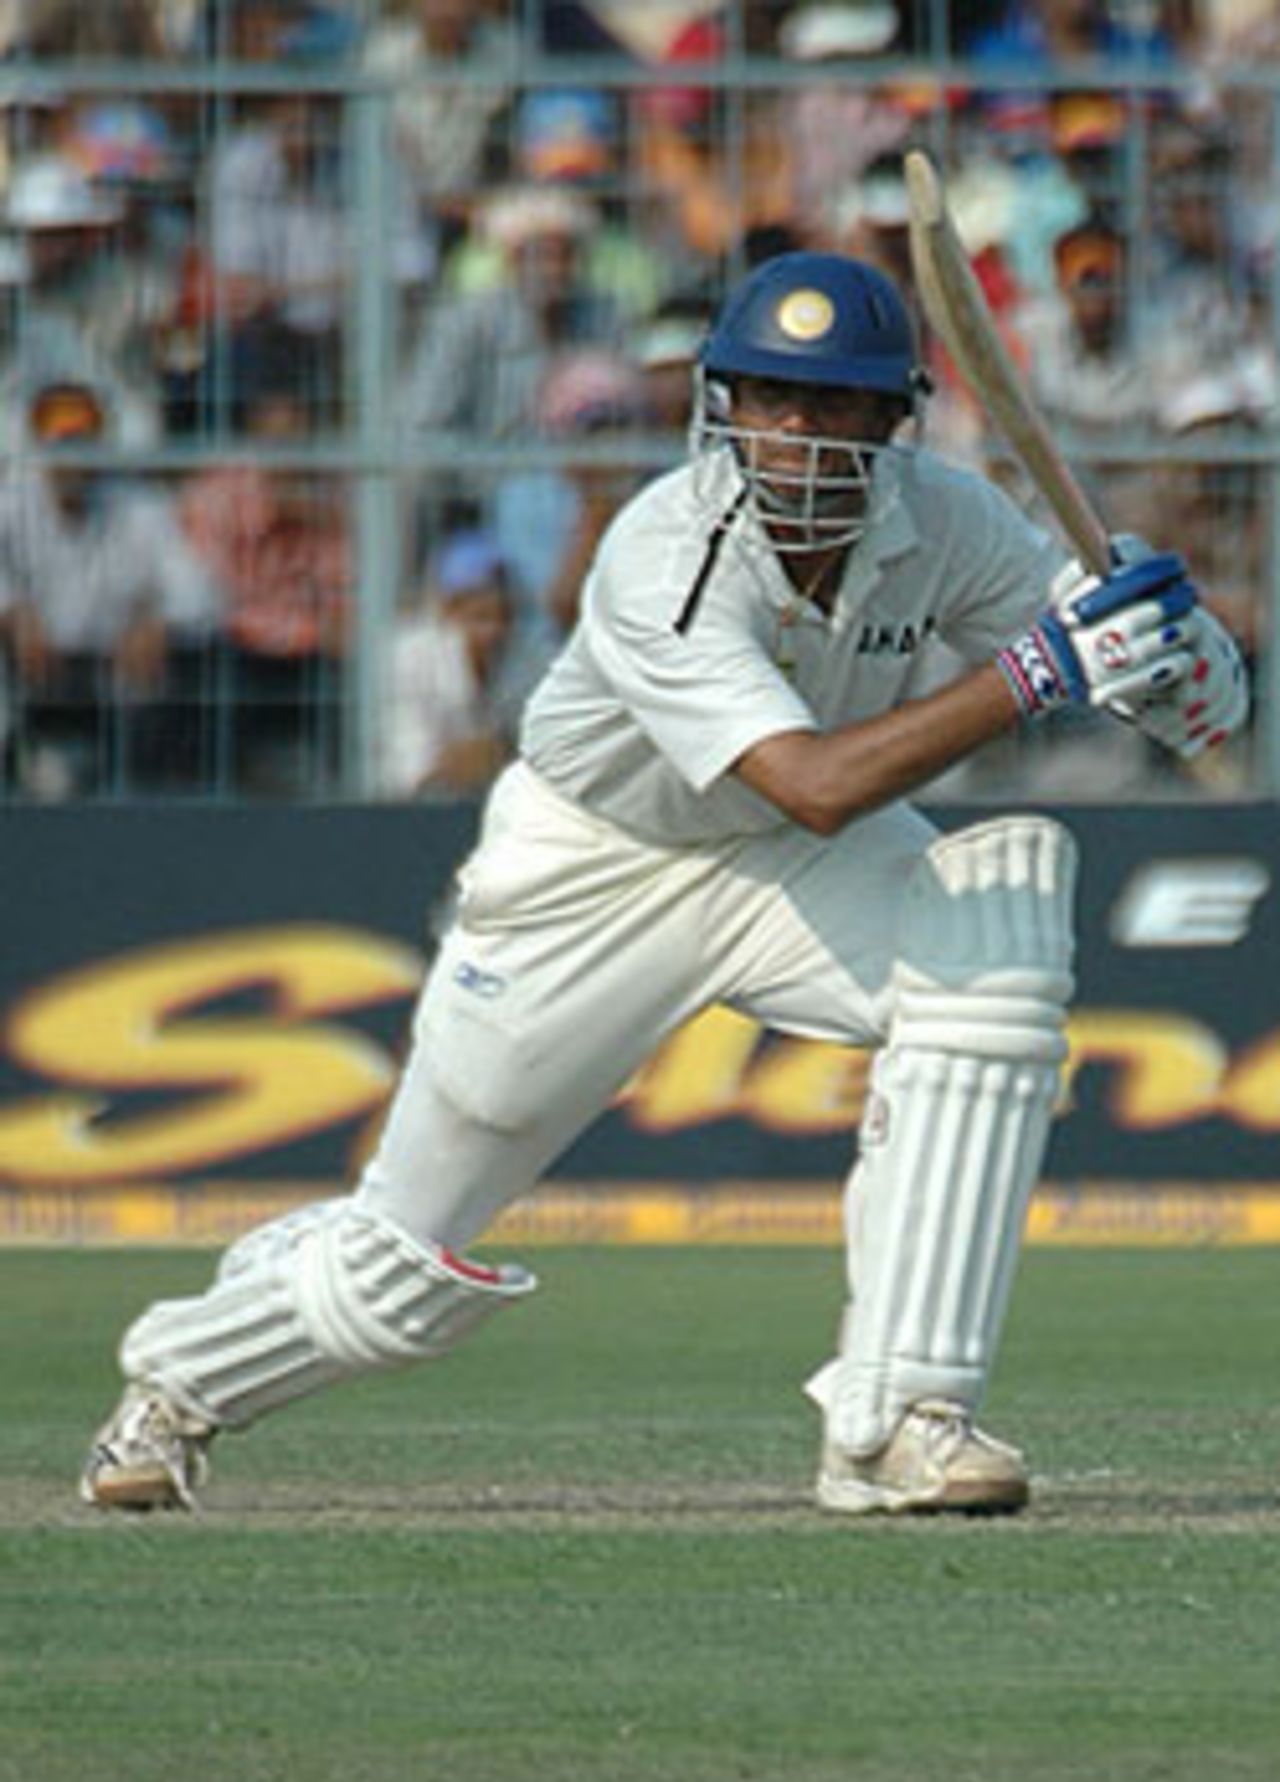 Not content with a hundred in the first innings, Rahul Dravid was at the Pakistanis once again. This time, with his team trying to force a win, Dravid made a brilliant 135. By virtue of scoring hundreds in both innings, Dravid became the second Indian after Sunil Gavaskar, to score a century in both innings of a test match on more than one occasion., 2nd Test: India v Pakistan at Kolkata, 16-20 Mar 2005